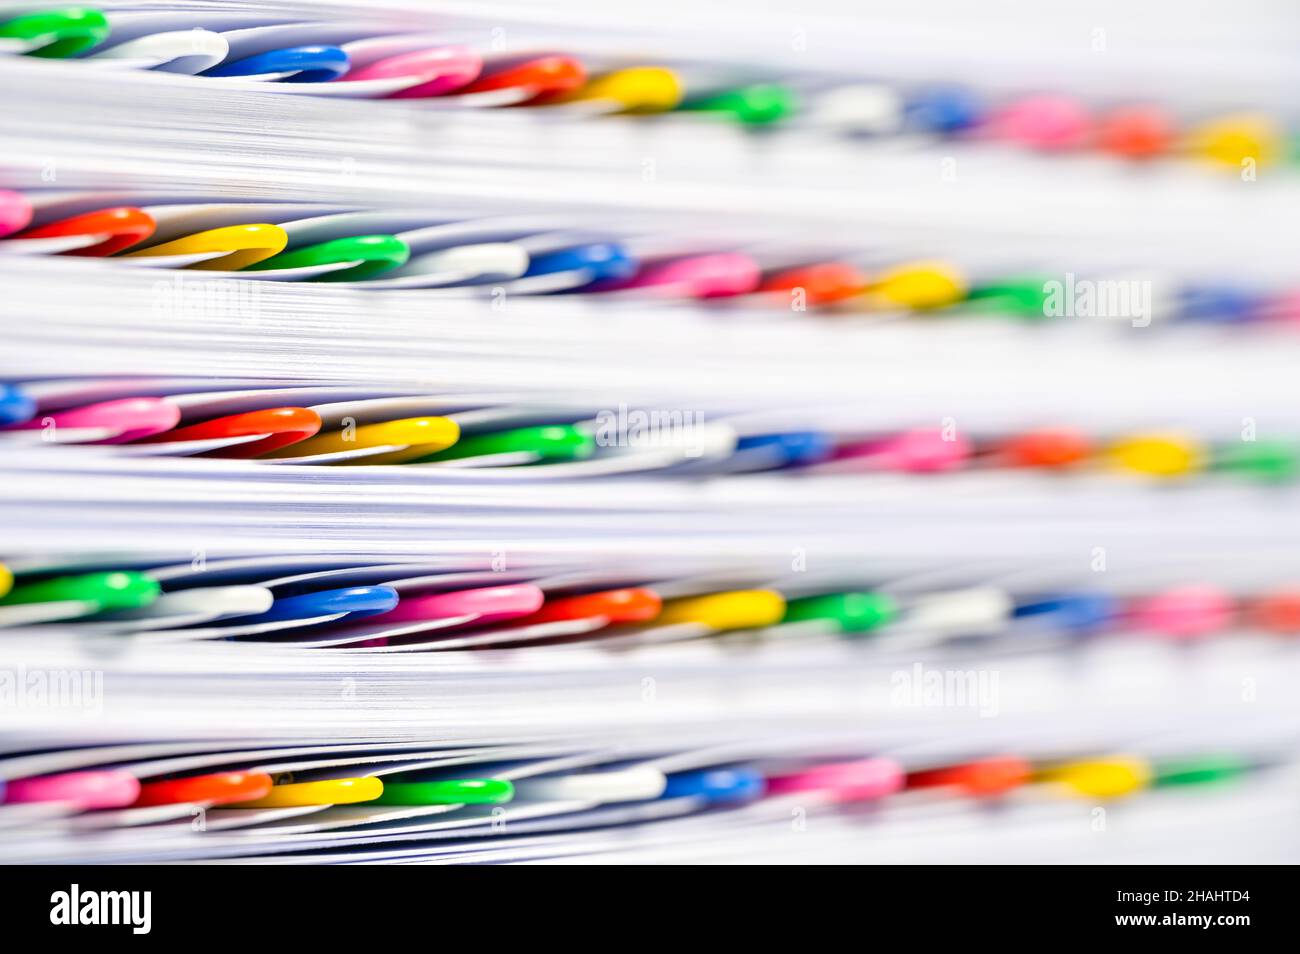 Colorful paperclips in a stack of files and papers. Office work, bureaucracy or red tape concept. Stock Photo